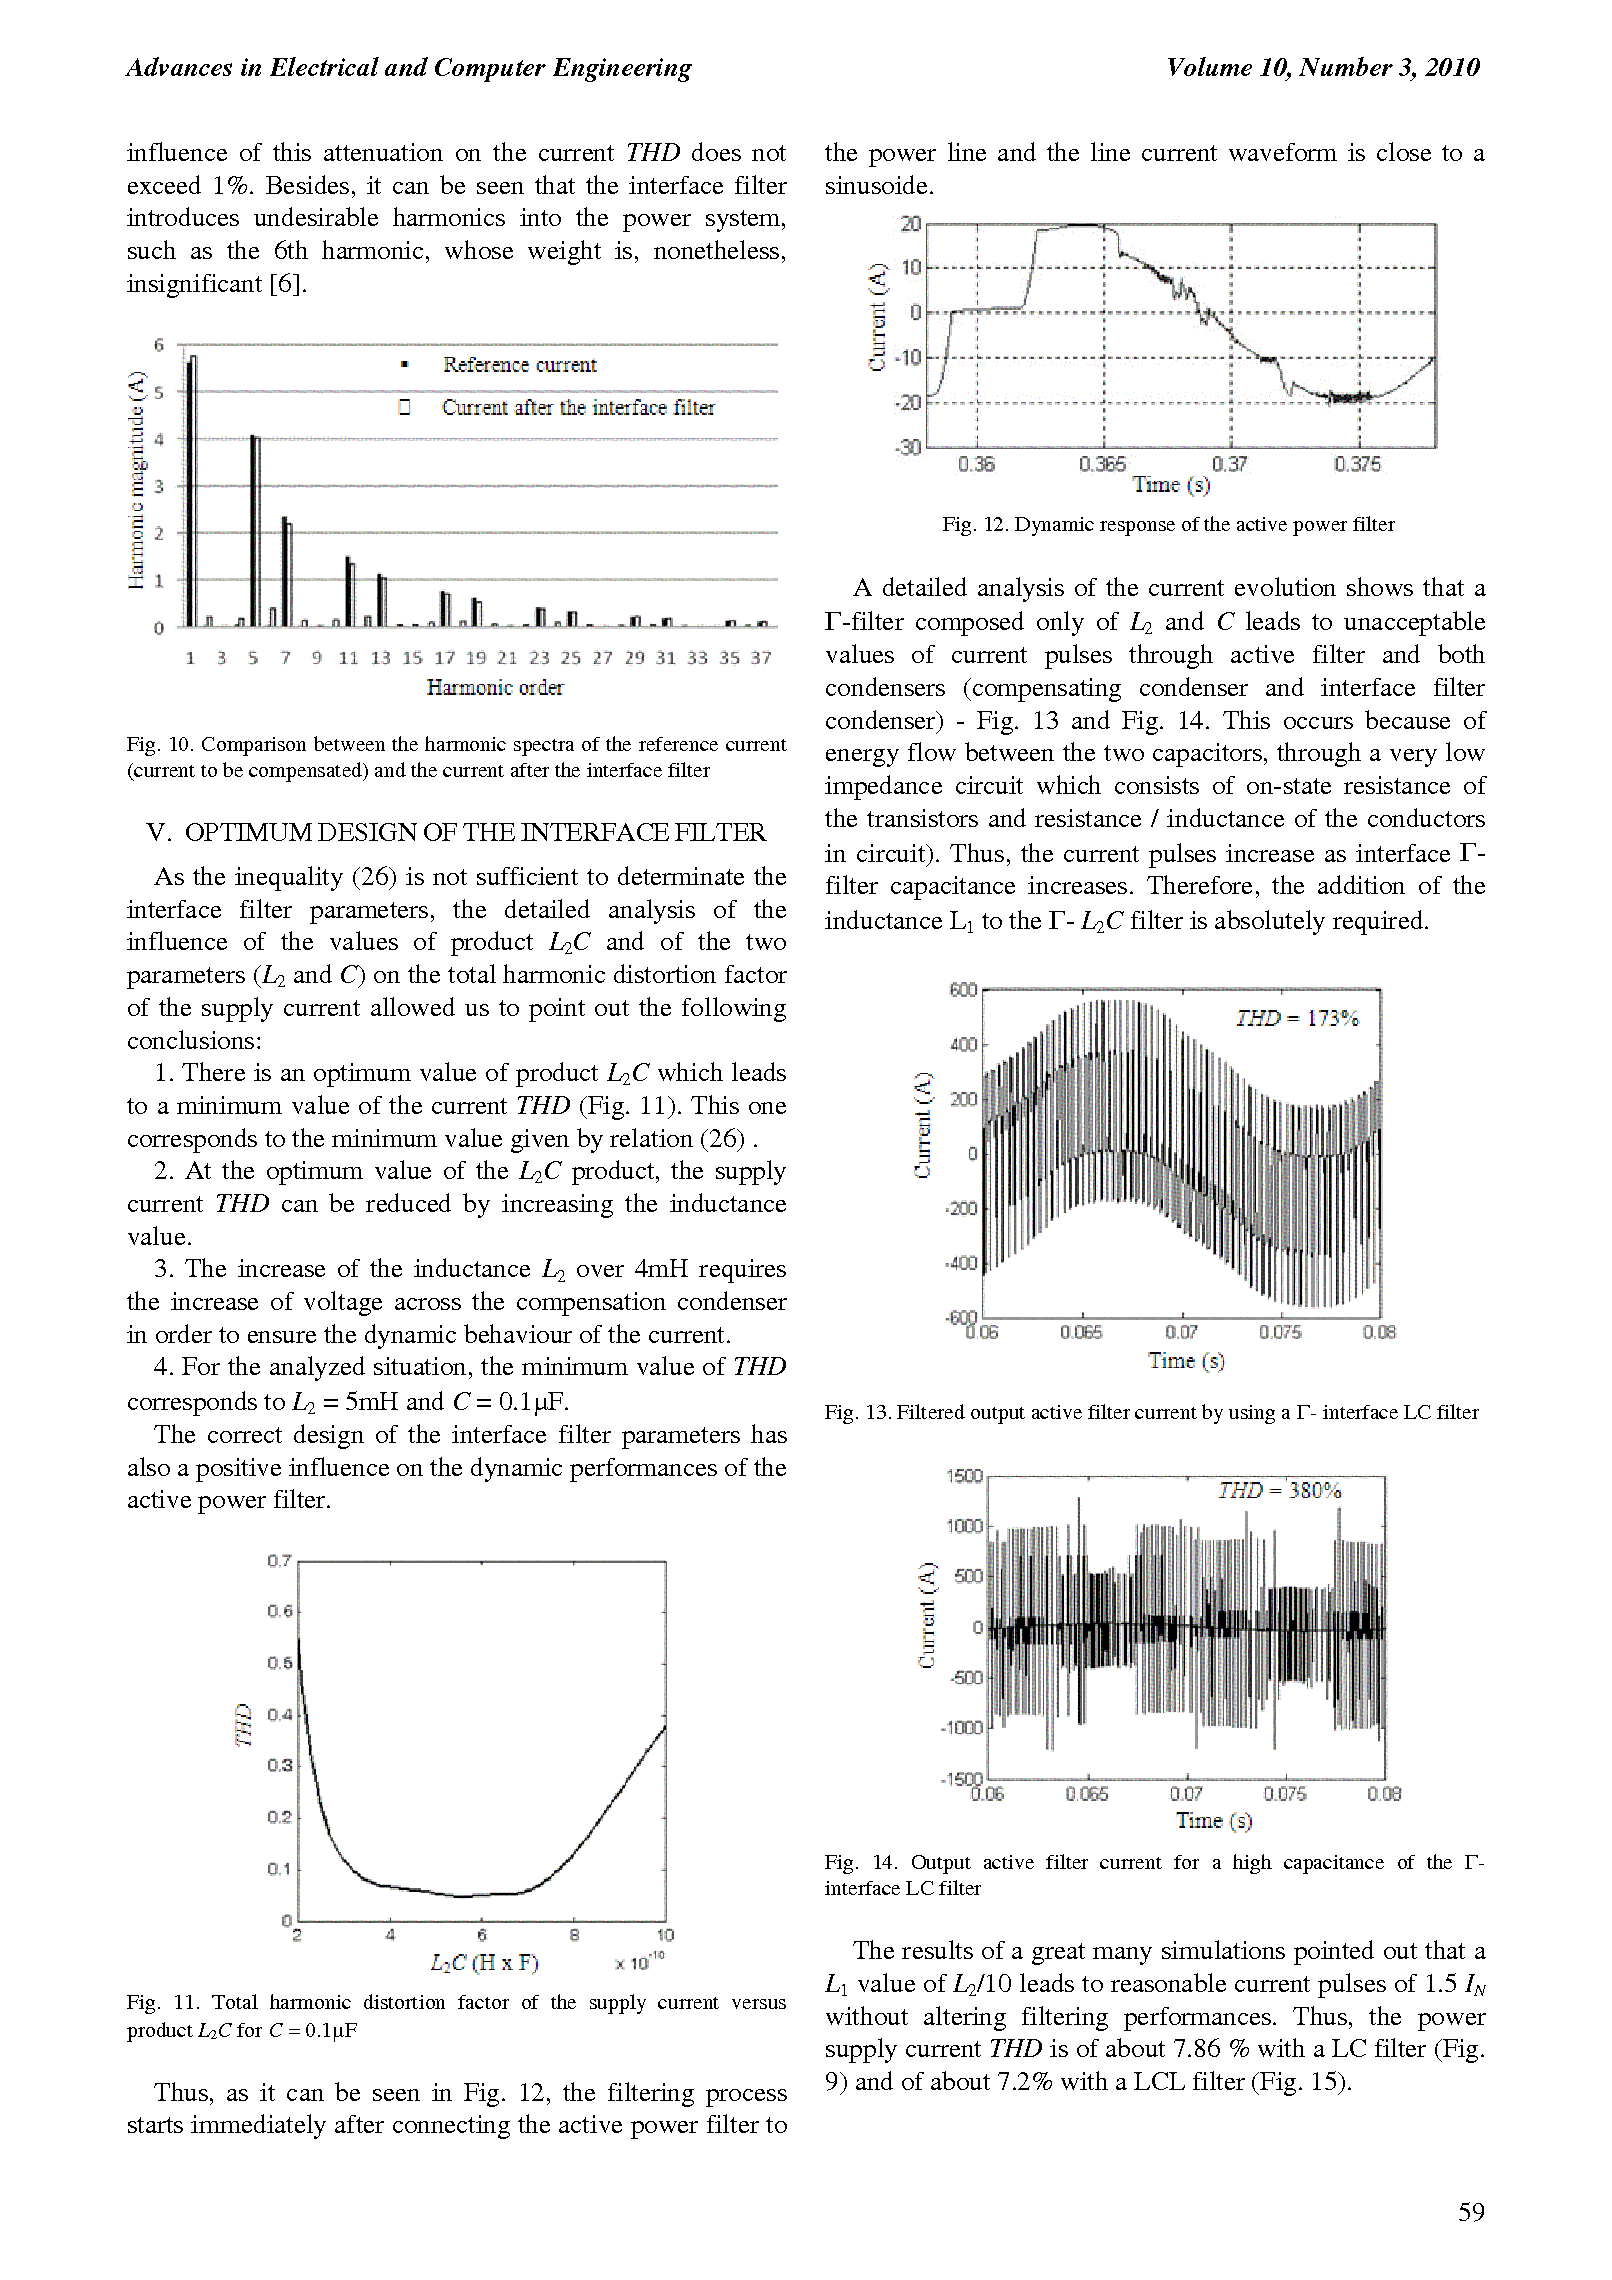 PDF Quickview for paper with DOI:10.4316/AECE.2010.03009